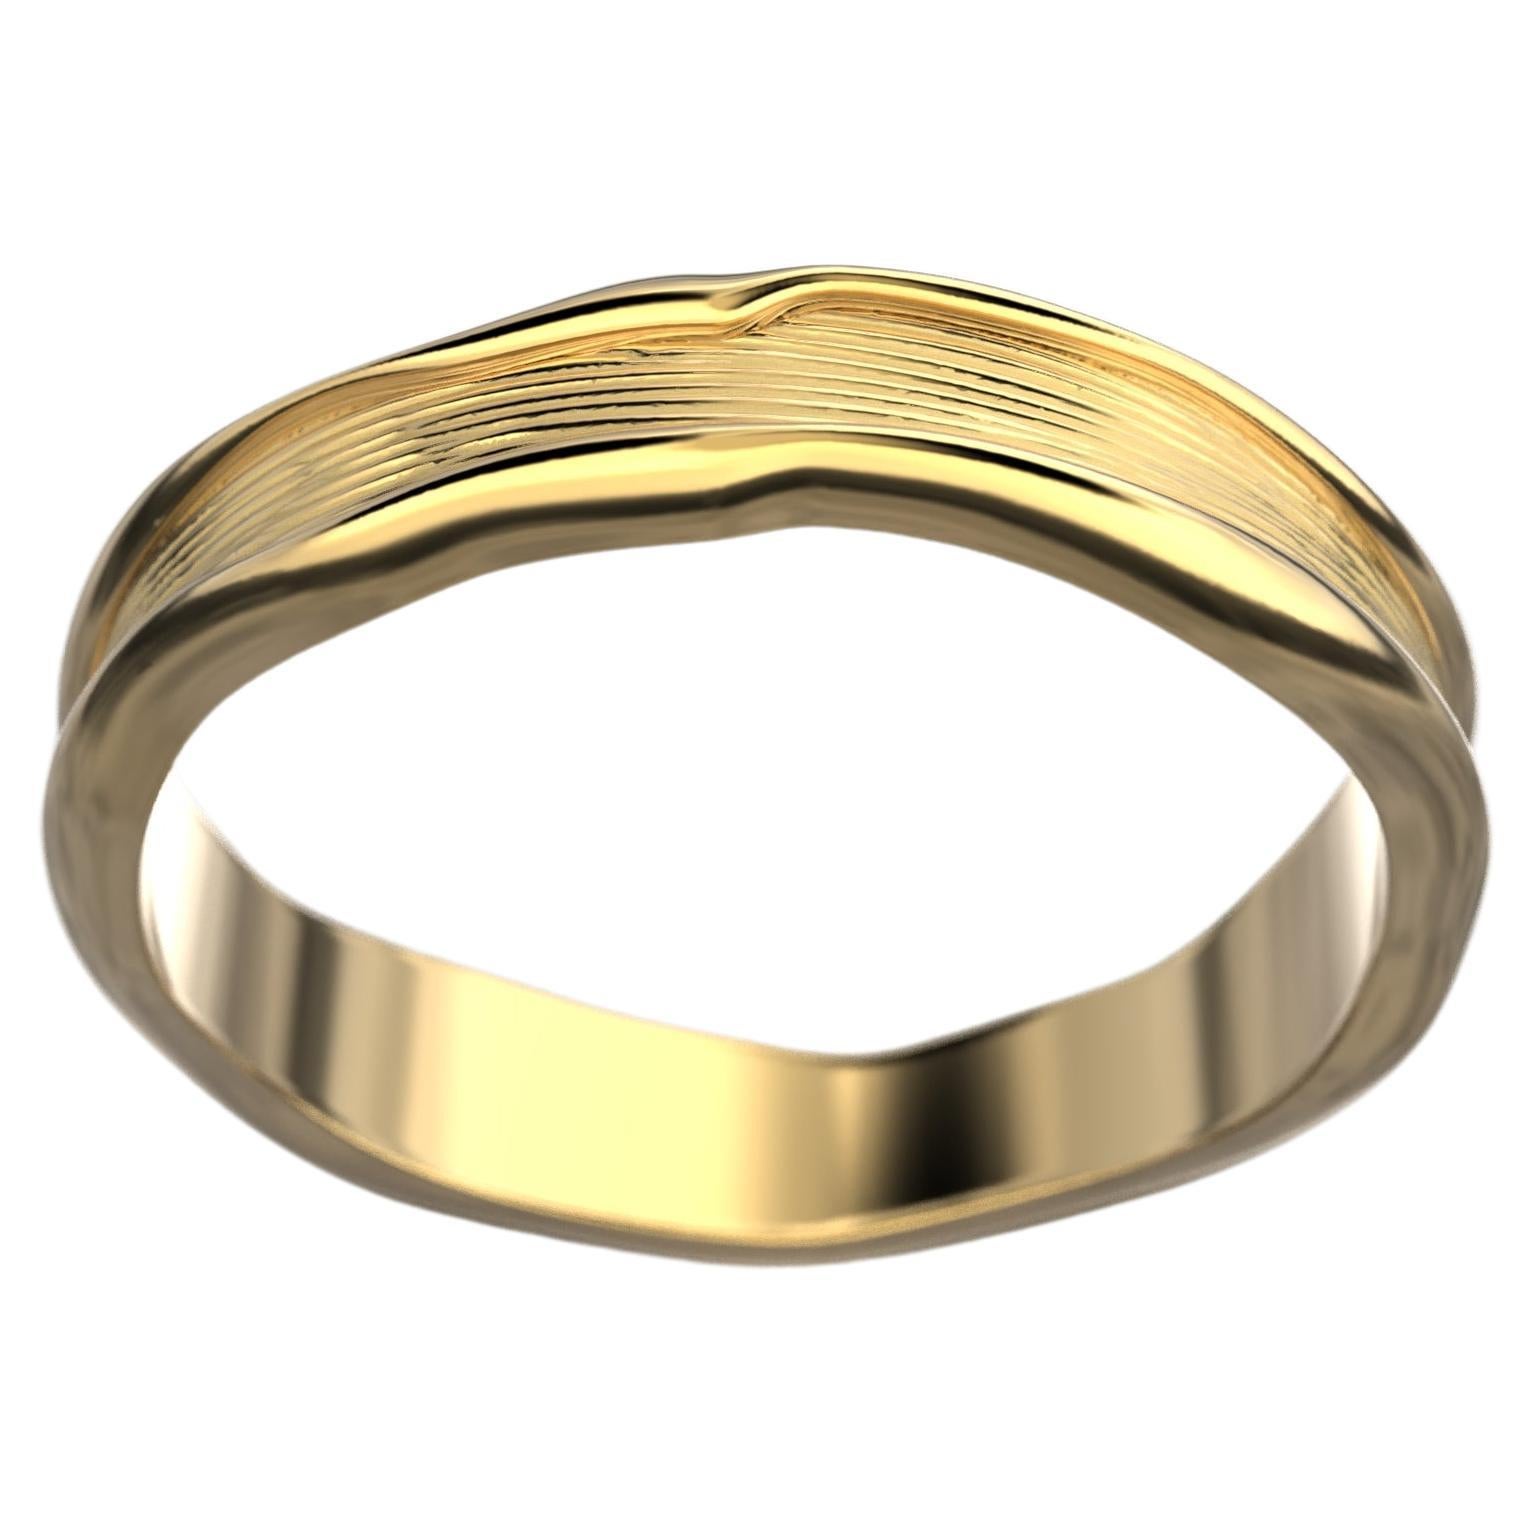 Florentine Finish Sophisticated Gold Wedding Band in 18k Made in Italy